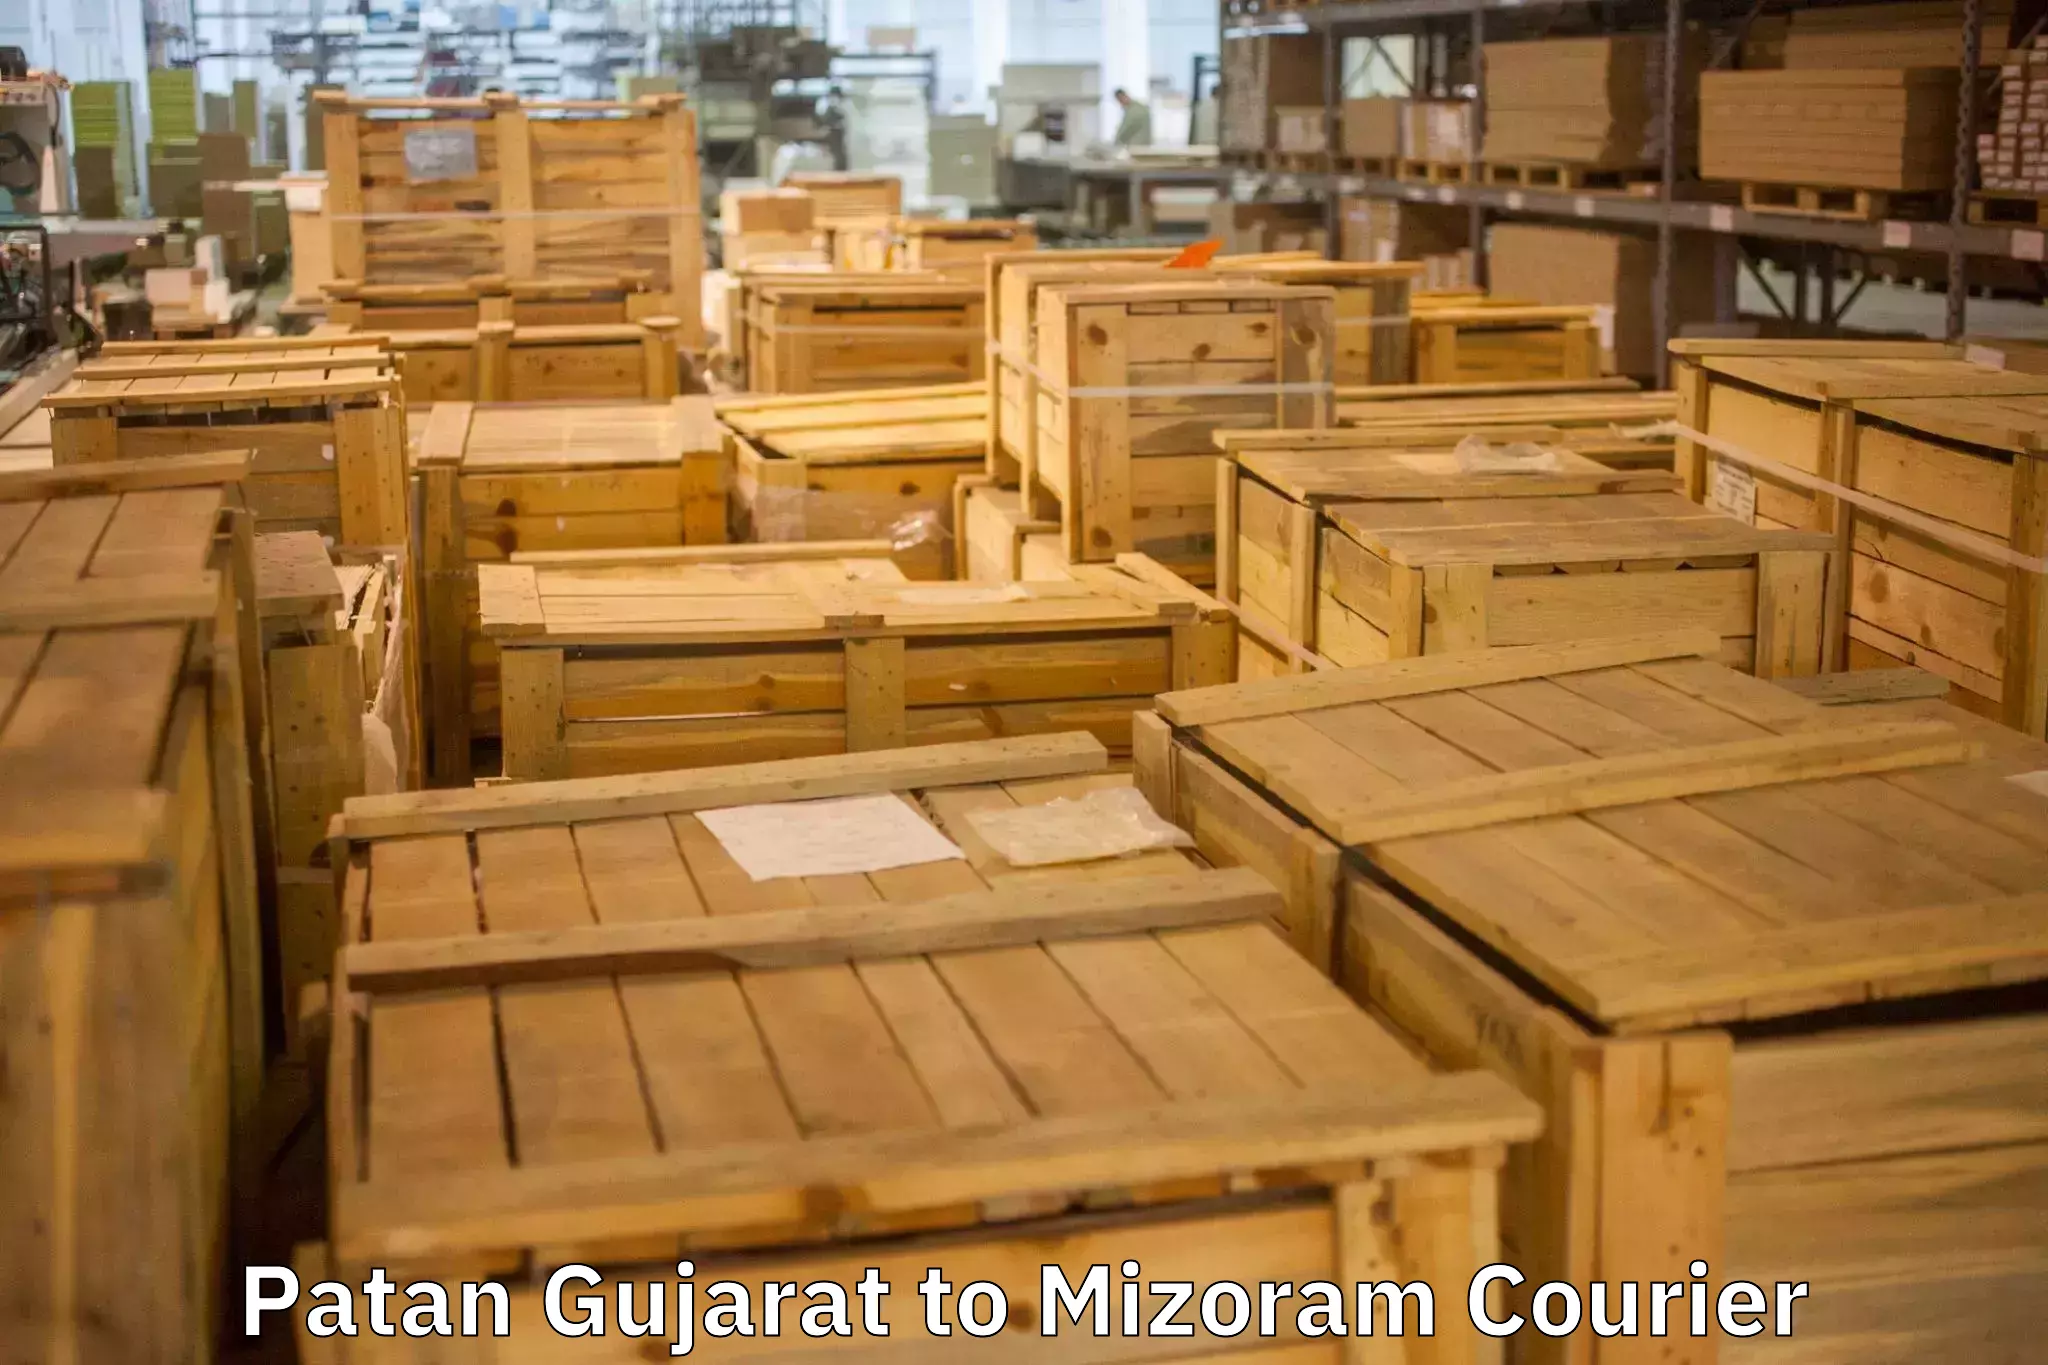 Efficient packing and moving Patan Gujarat to Darlawn